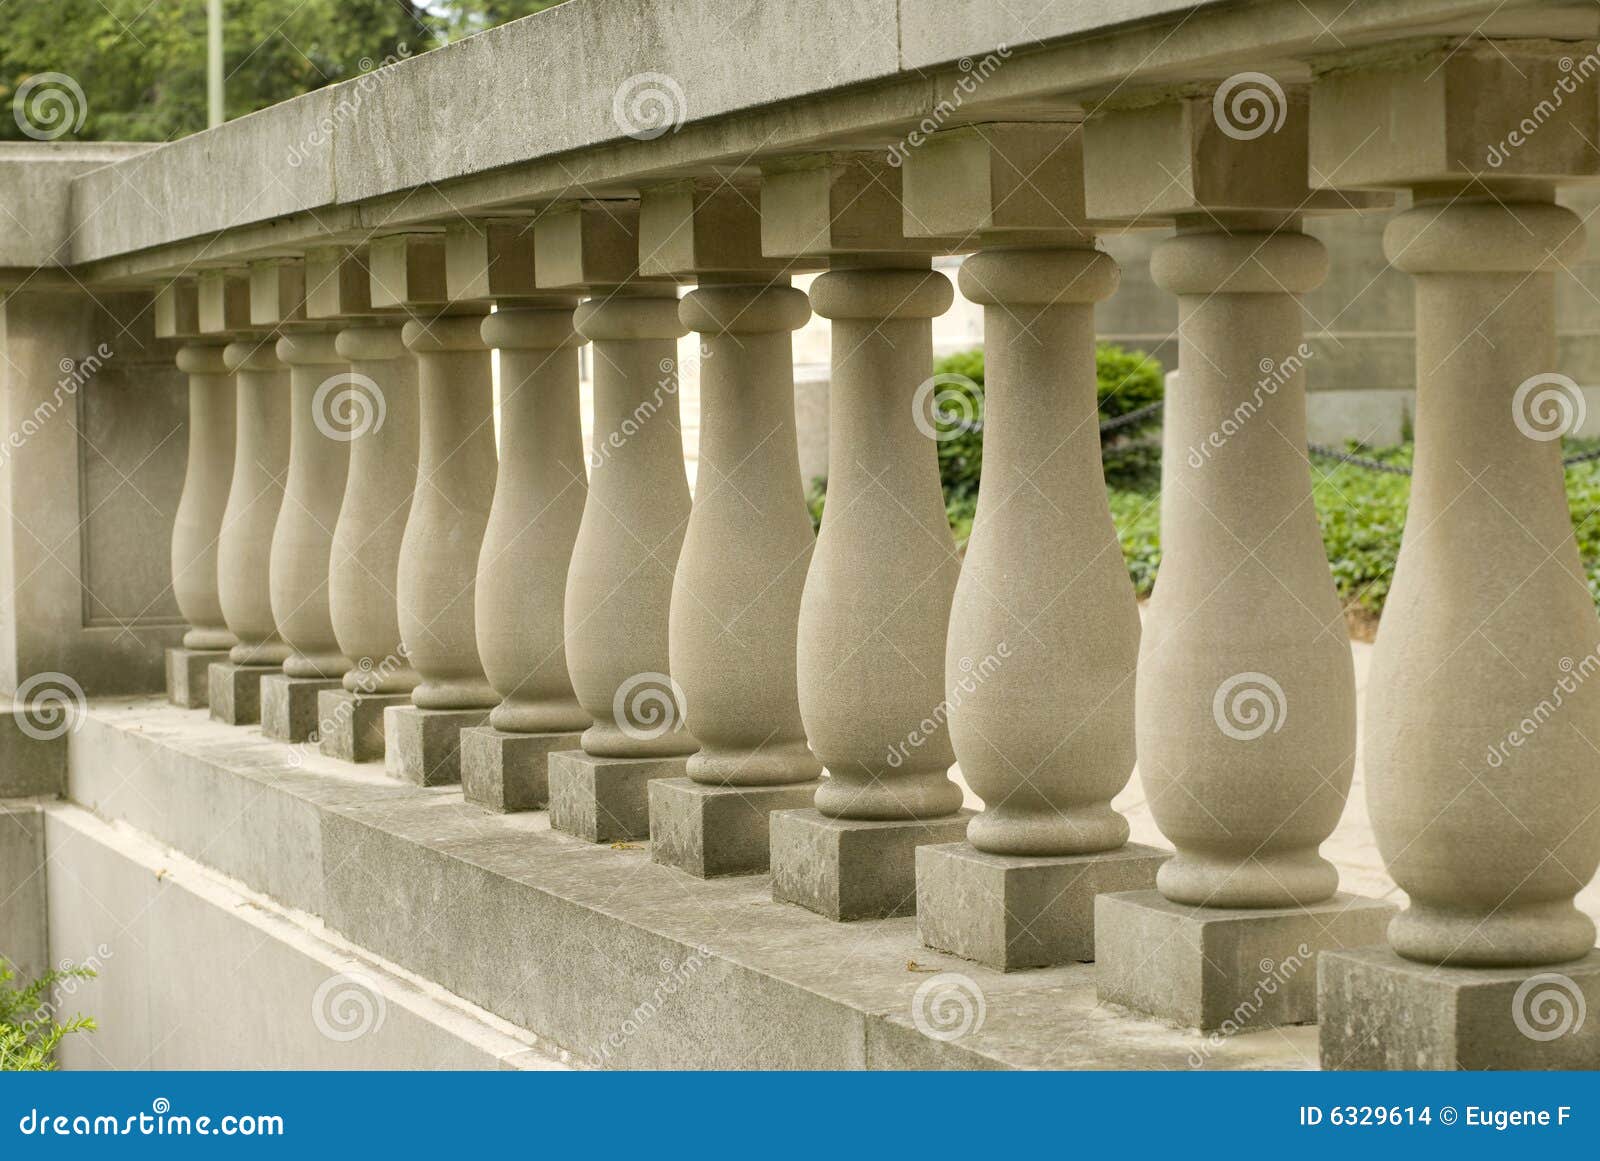 Cement pillars stock photo. Image of antique, background - 6329614